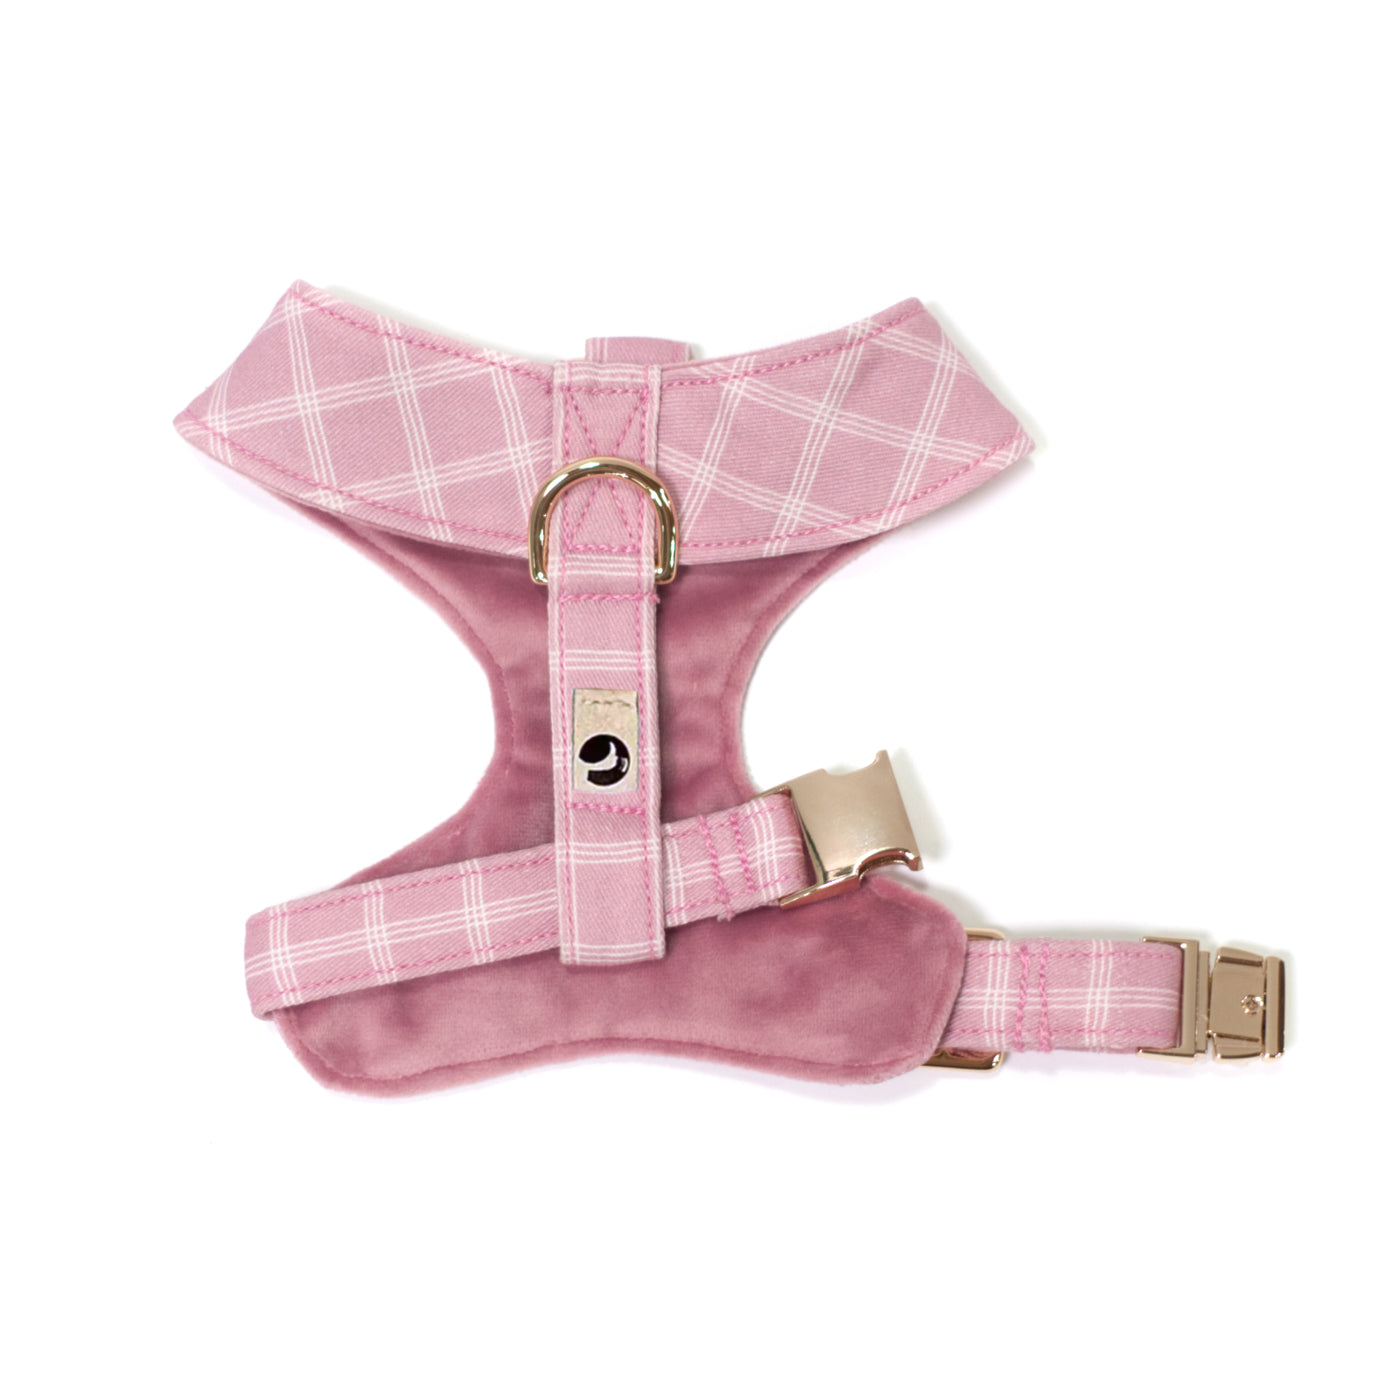 Rose colored reversible dog harness in velvet and plaid shown from back/top in size XS